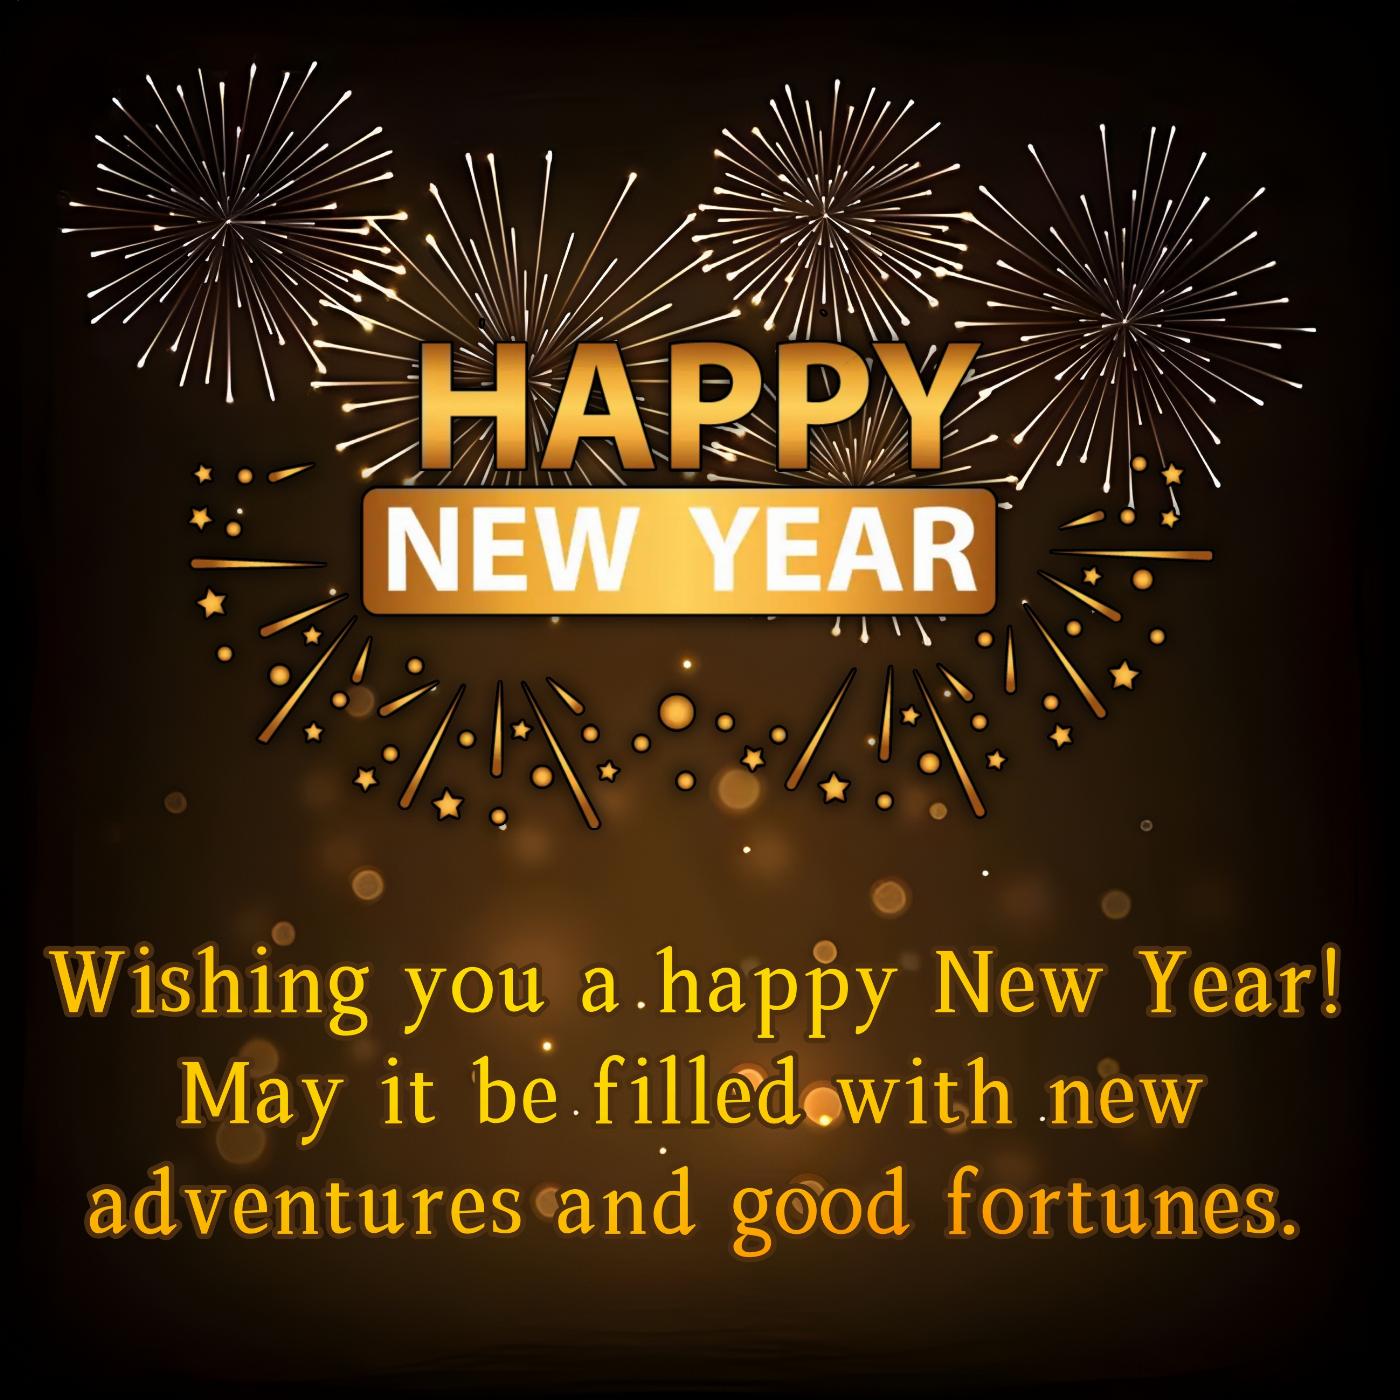 Wishing you a happy New Year